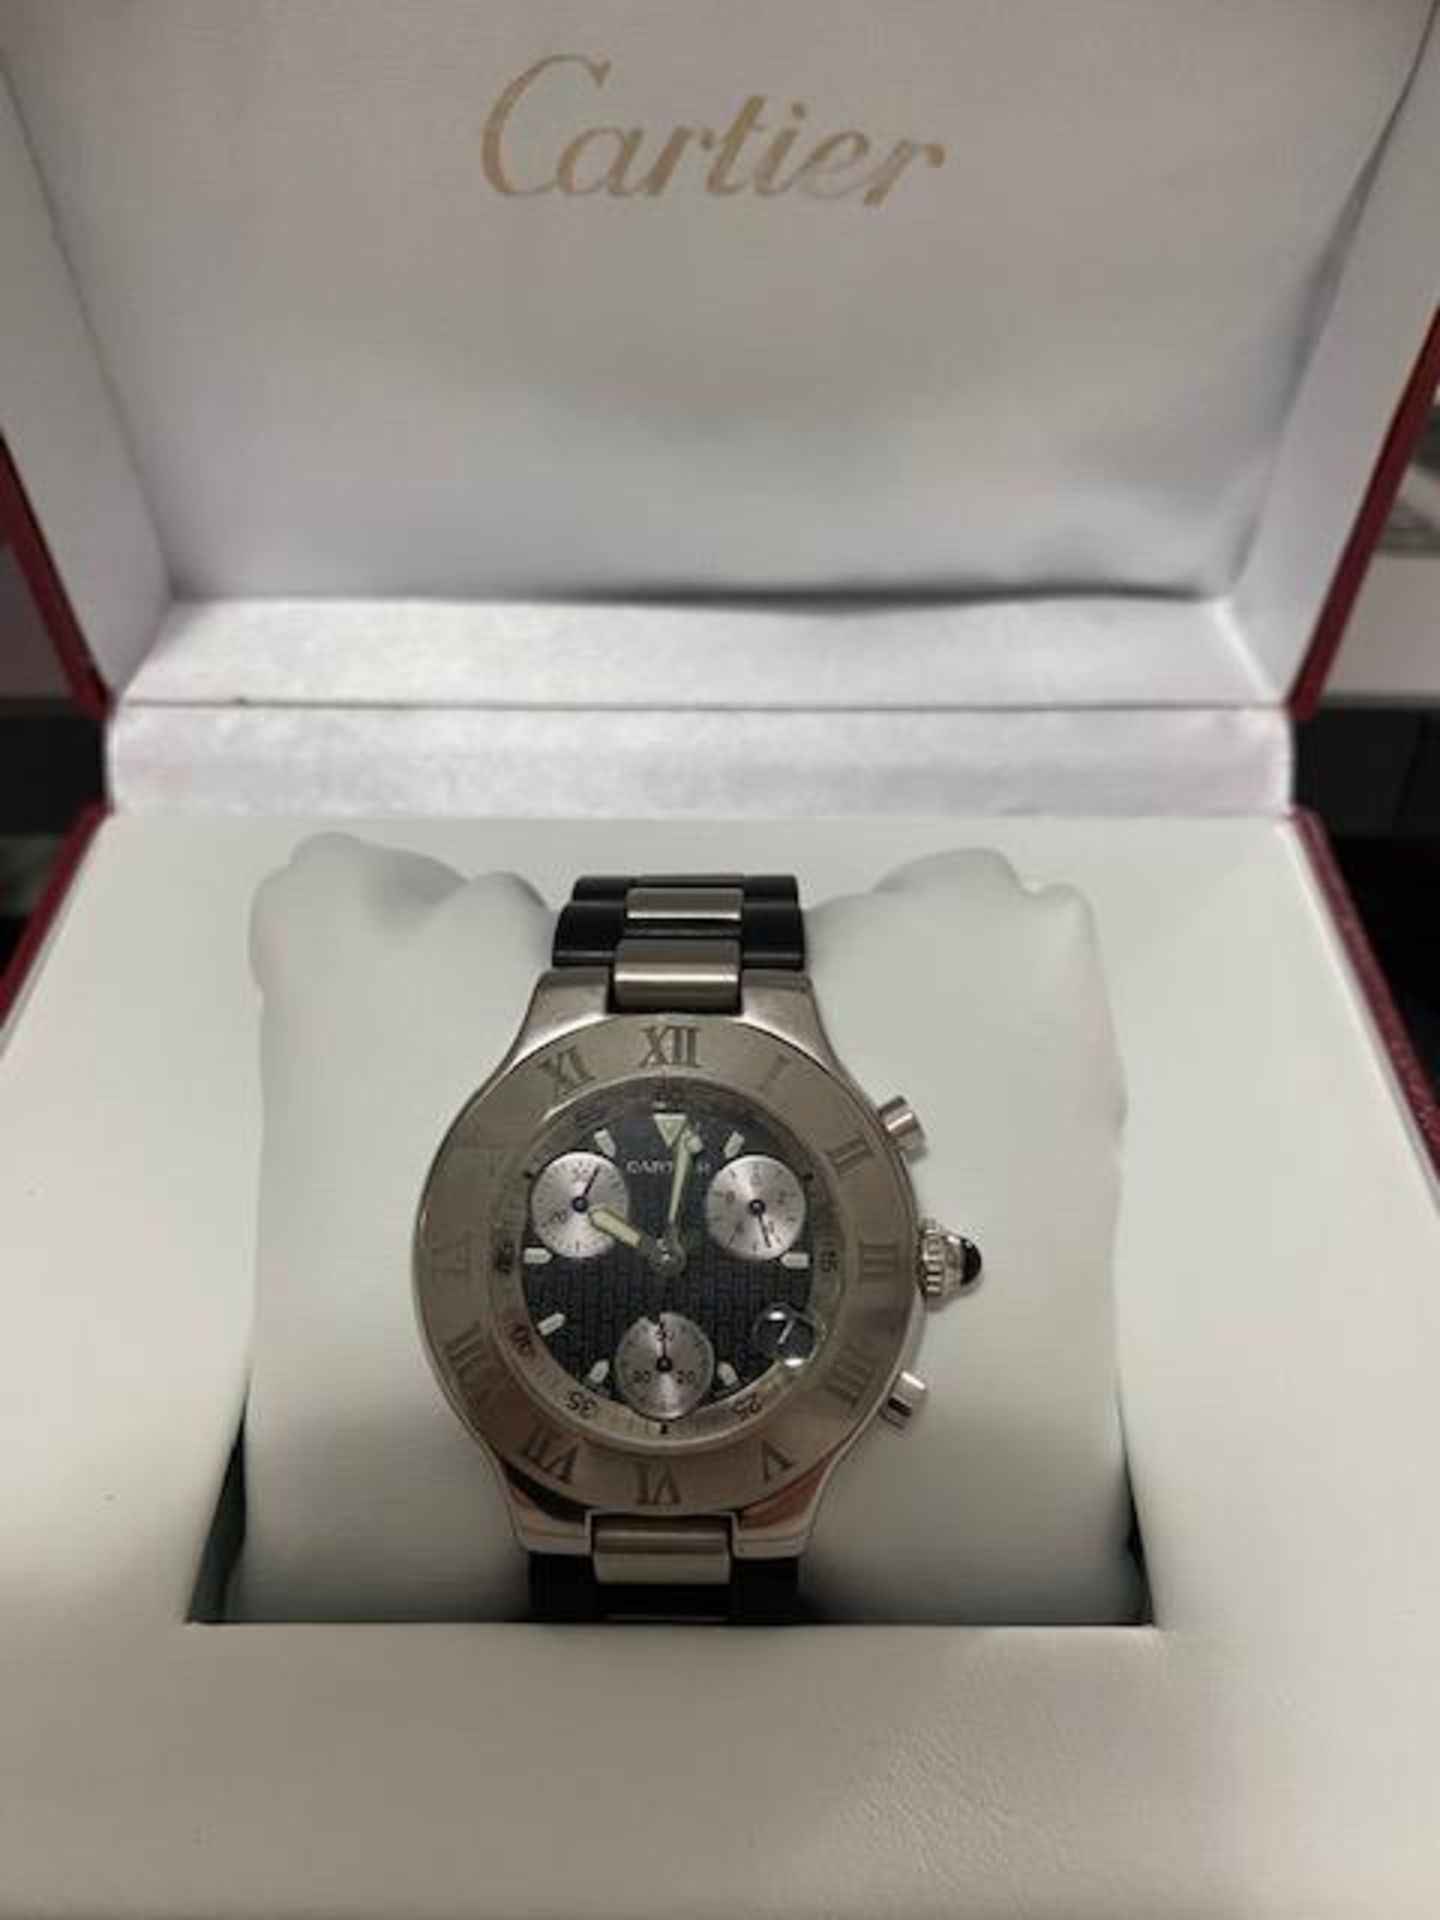 Cartier Chronoscaph Gents Watch with Original Box and Manual, Steel and Rubber Strap *NO VAT* - Image 2 of 9